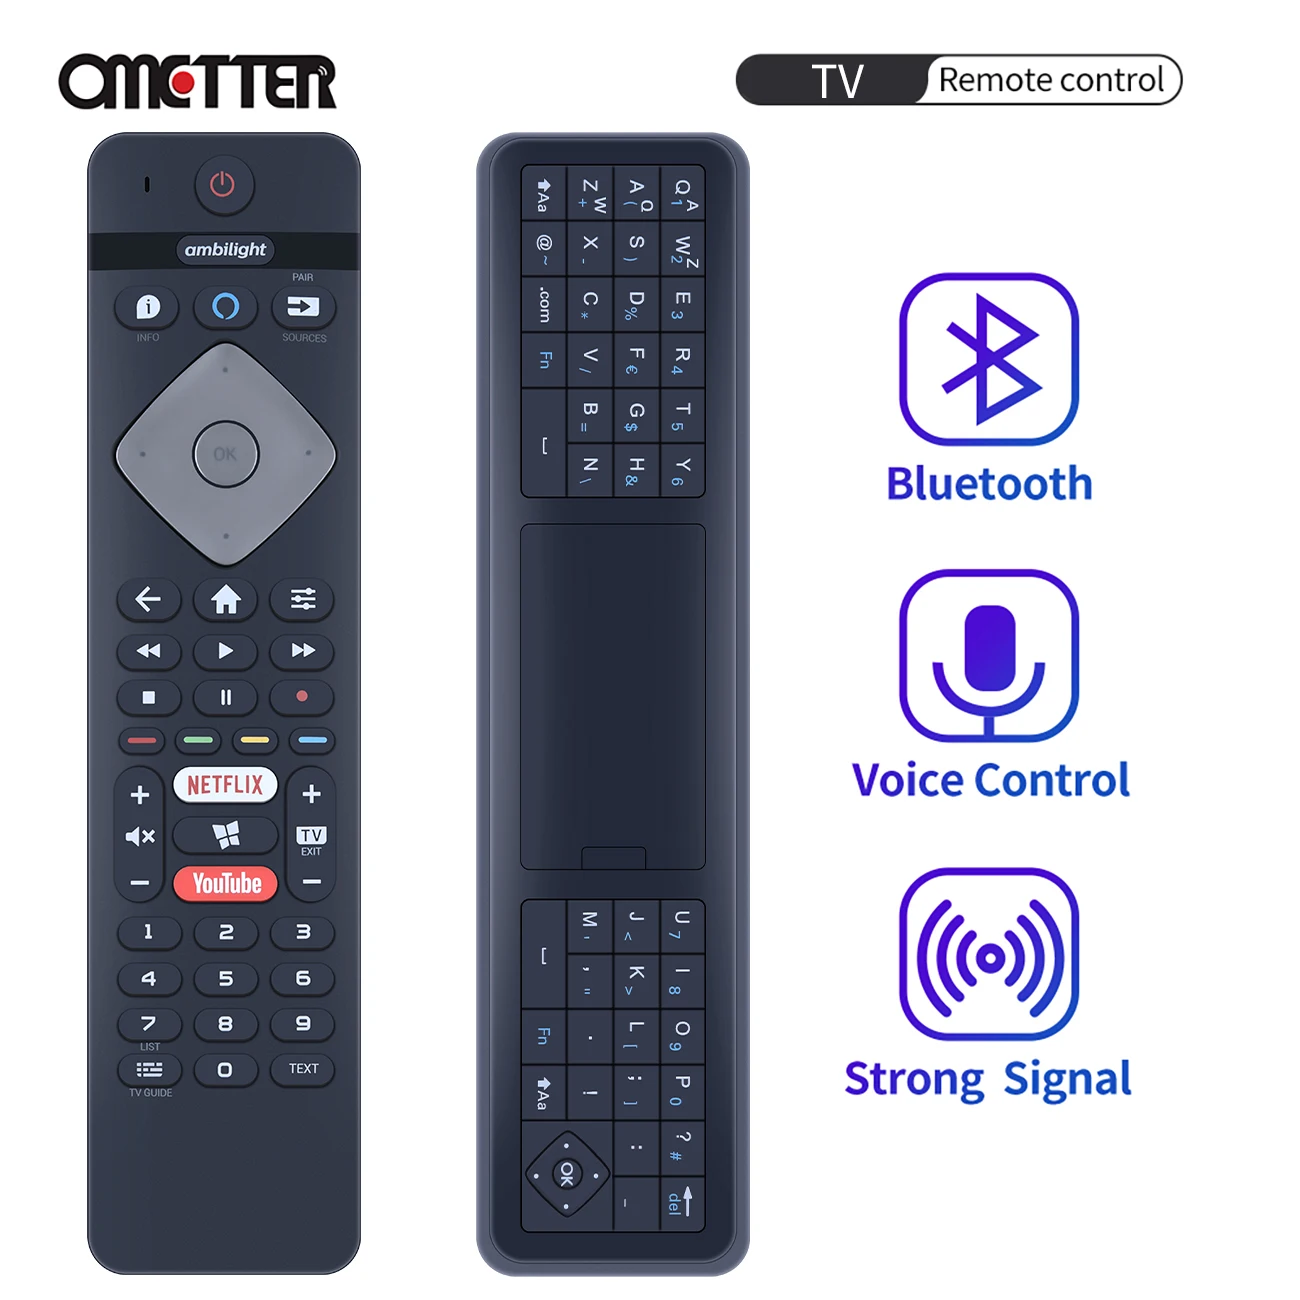 new-voice-remote-control-for-philips-ykf463-009-398gm10bephn0036ht-7800-series-4k-uhd-led-smart-tv-65pus7855-12-58pus7855-50pus7